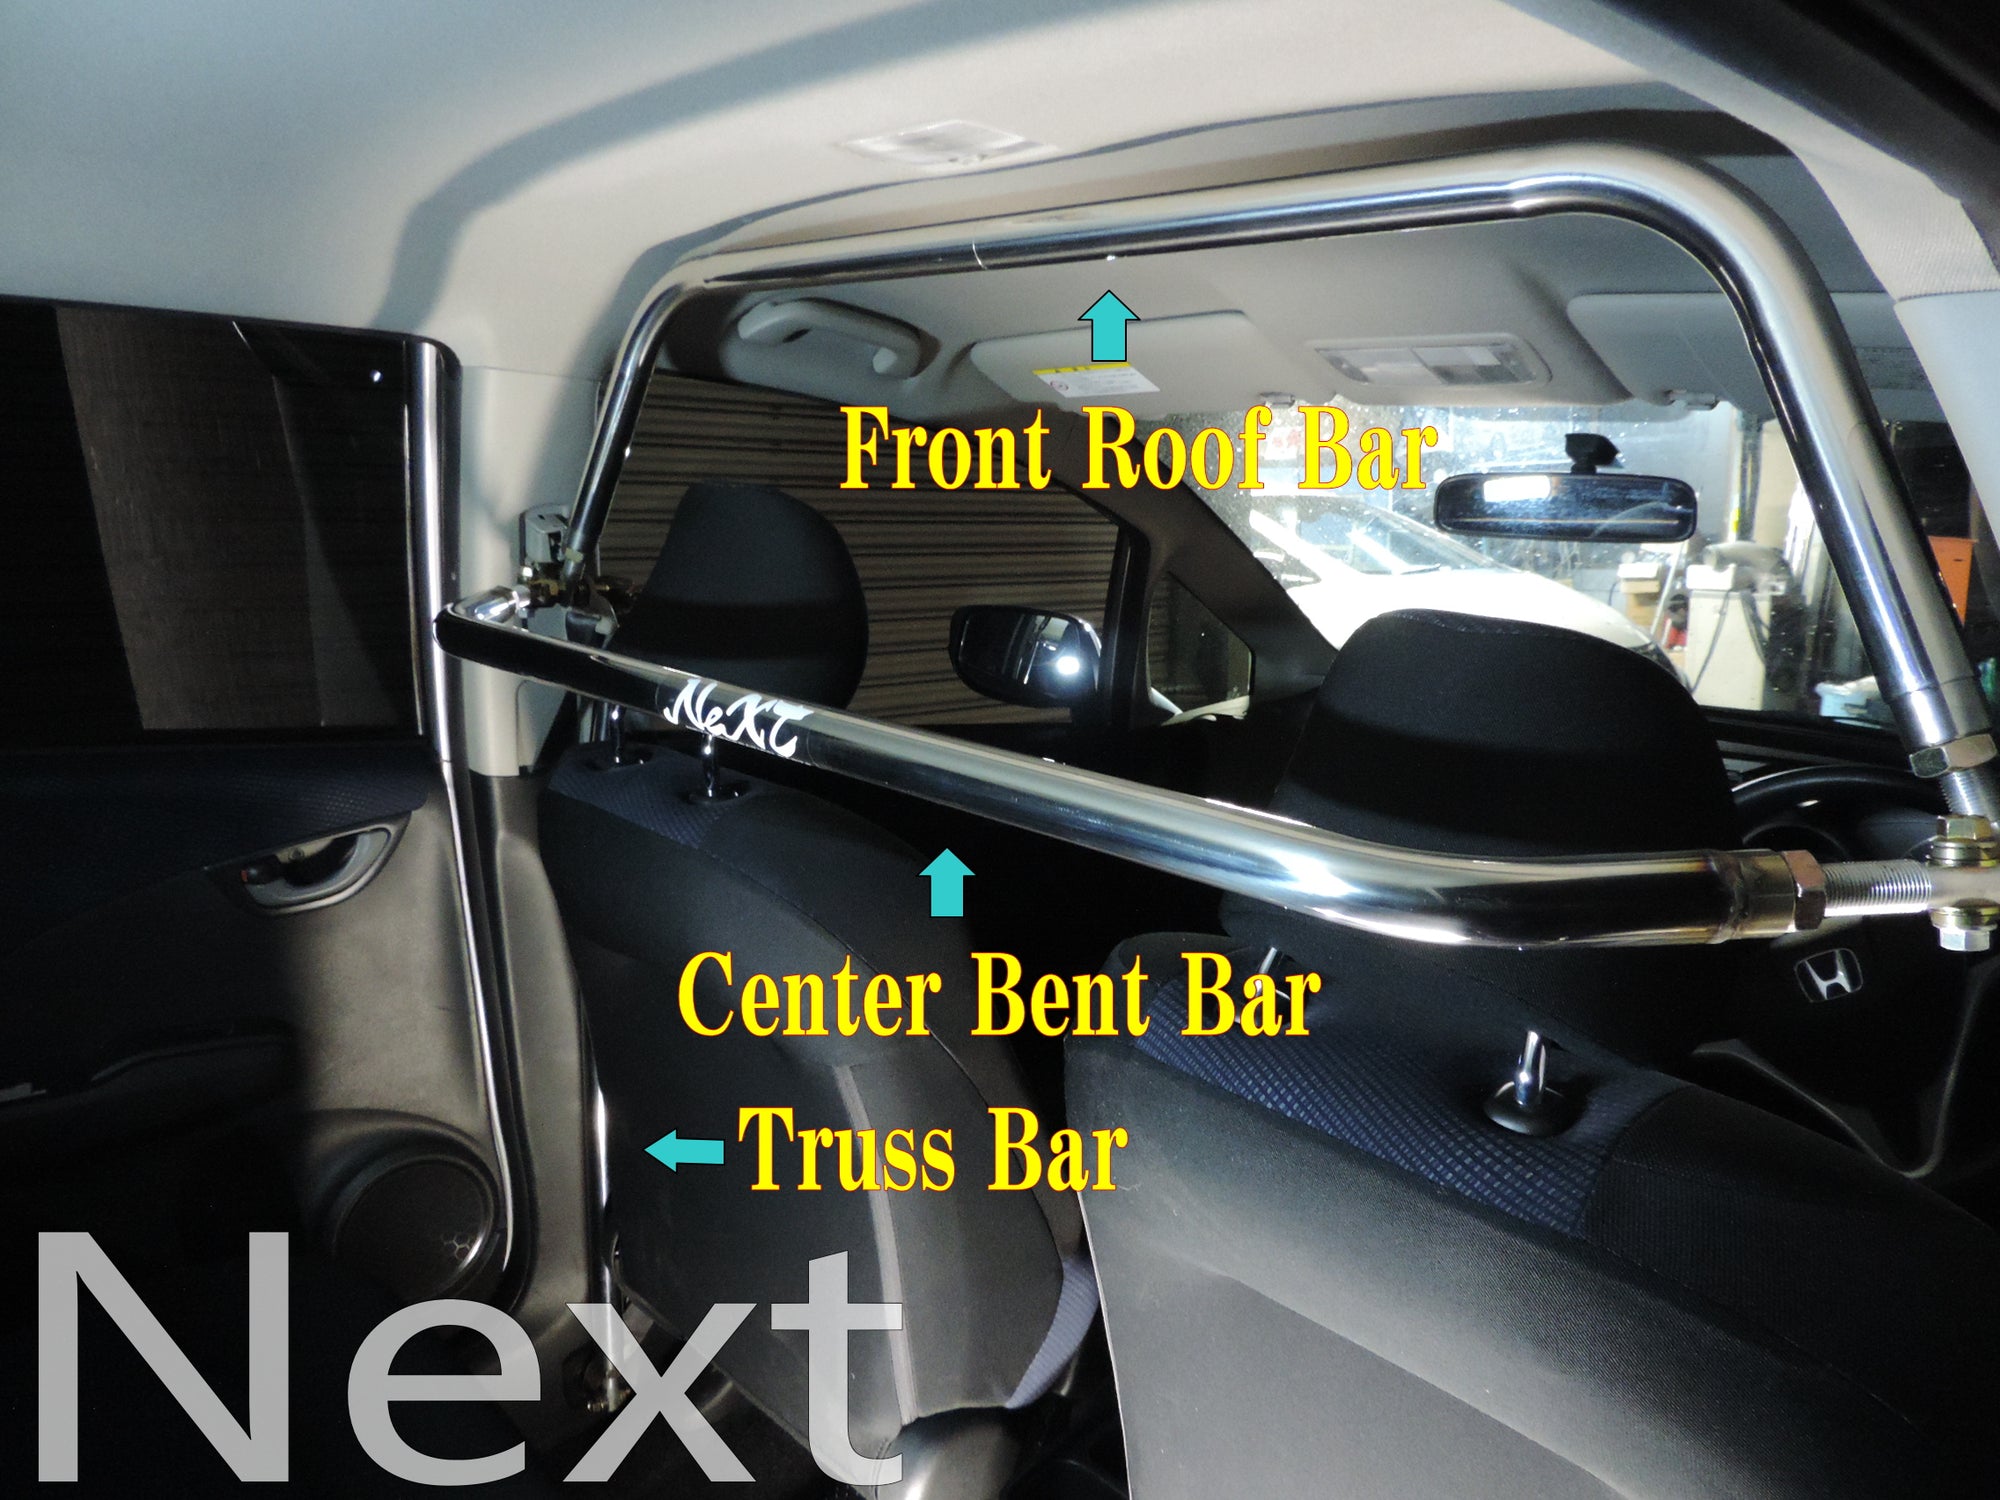 NEXT MIRACLE CROSS BAR FRONT ROOF BAR STAINLESS 32 FOR SUZUKI ALTO HA36 NEXT-01399